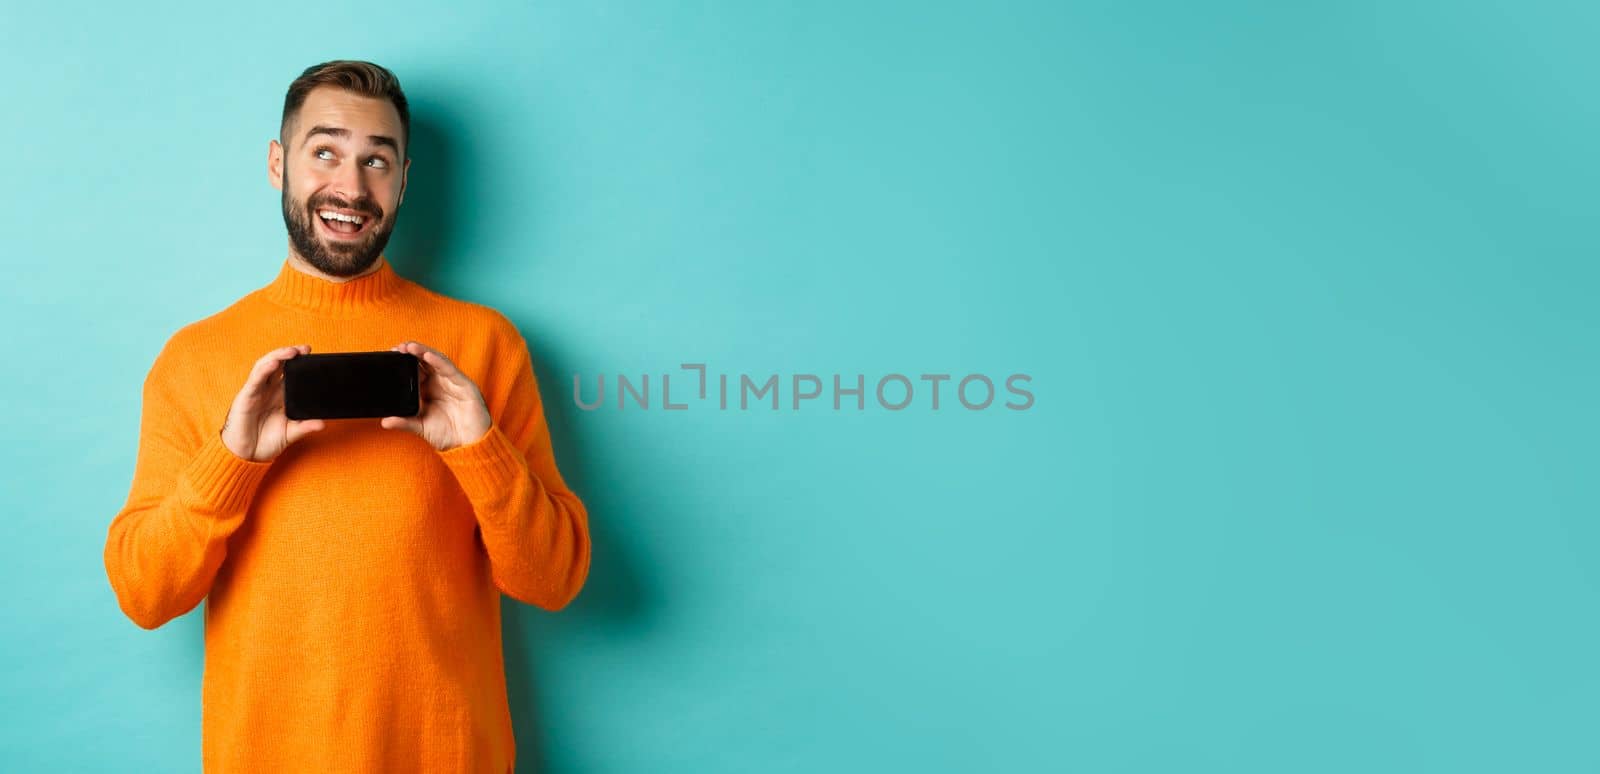 Online shopping. Young man thinking and showing smartphone screen, looking dreamy at upper left corner, standing over light blue background.